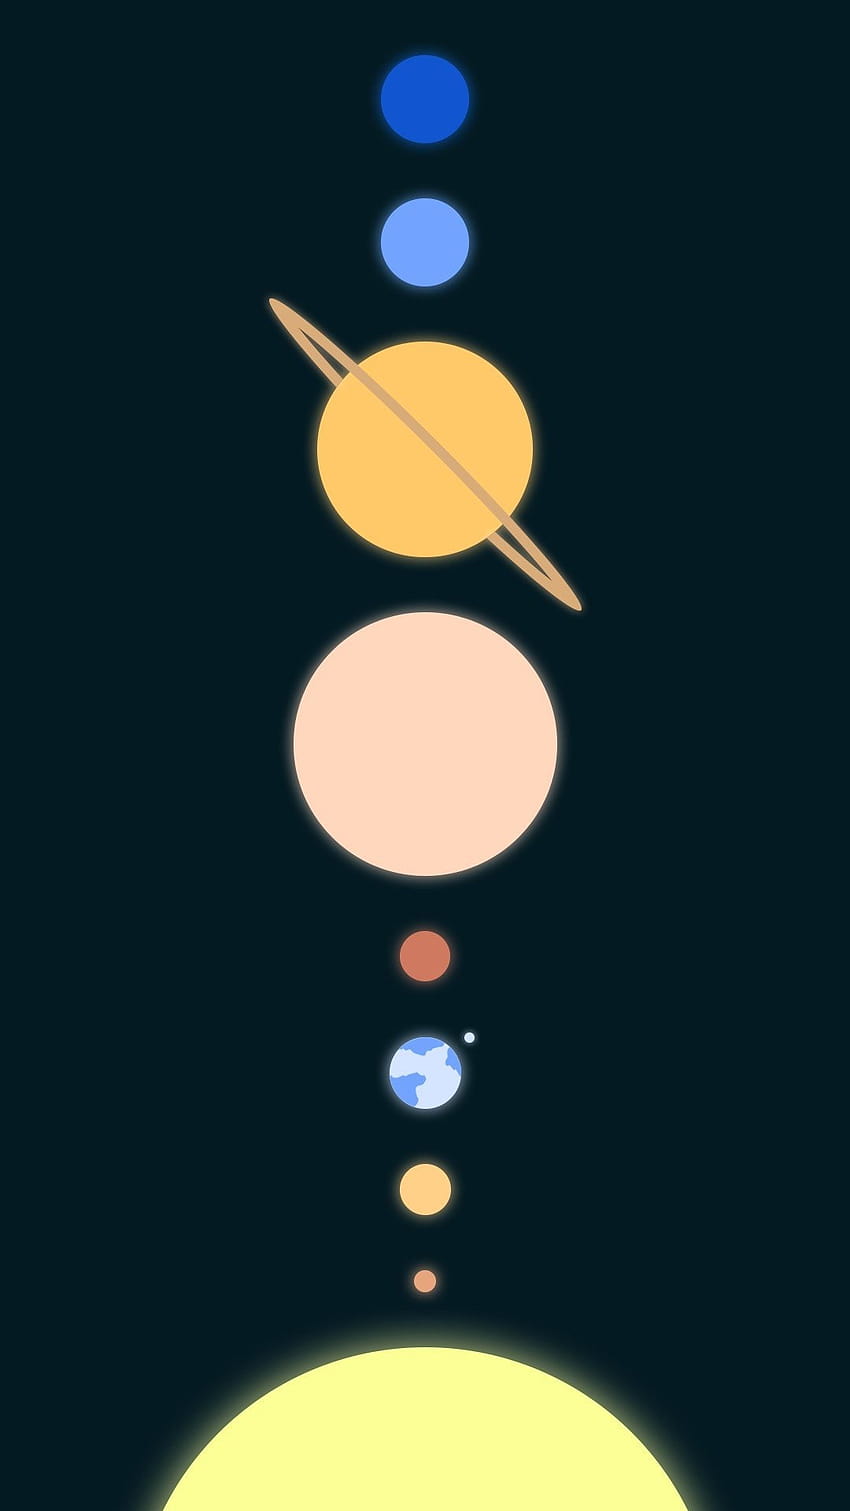 Solar System Minimal Android Backgrounds, solar system minimalist HD phone wallpaper